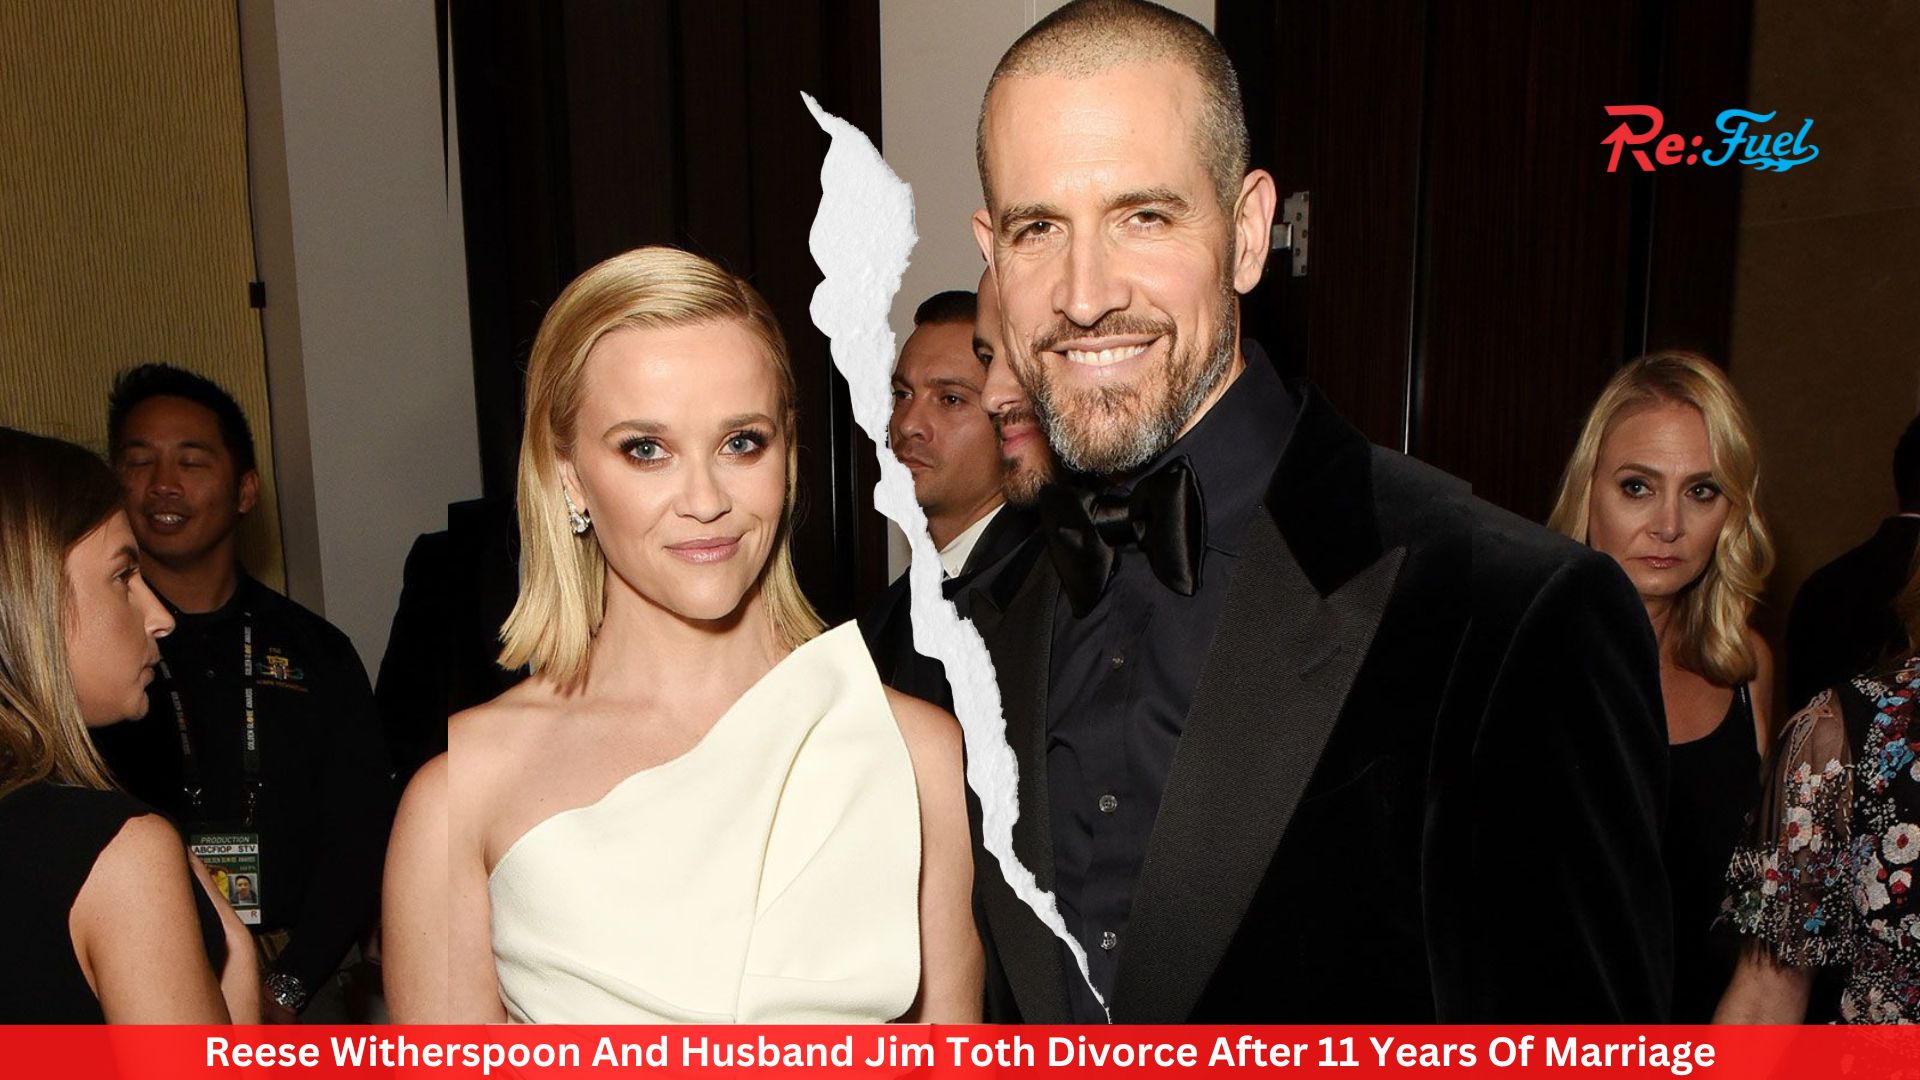 Reese Witherspoon And Husband Jim Toth Divorce After 11 Years Of Marriage